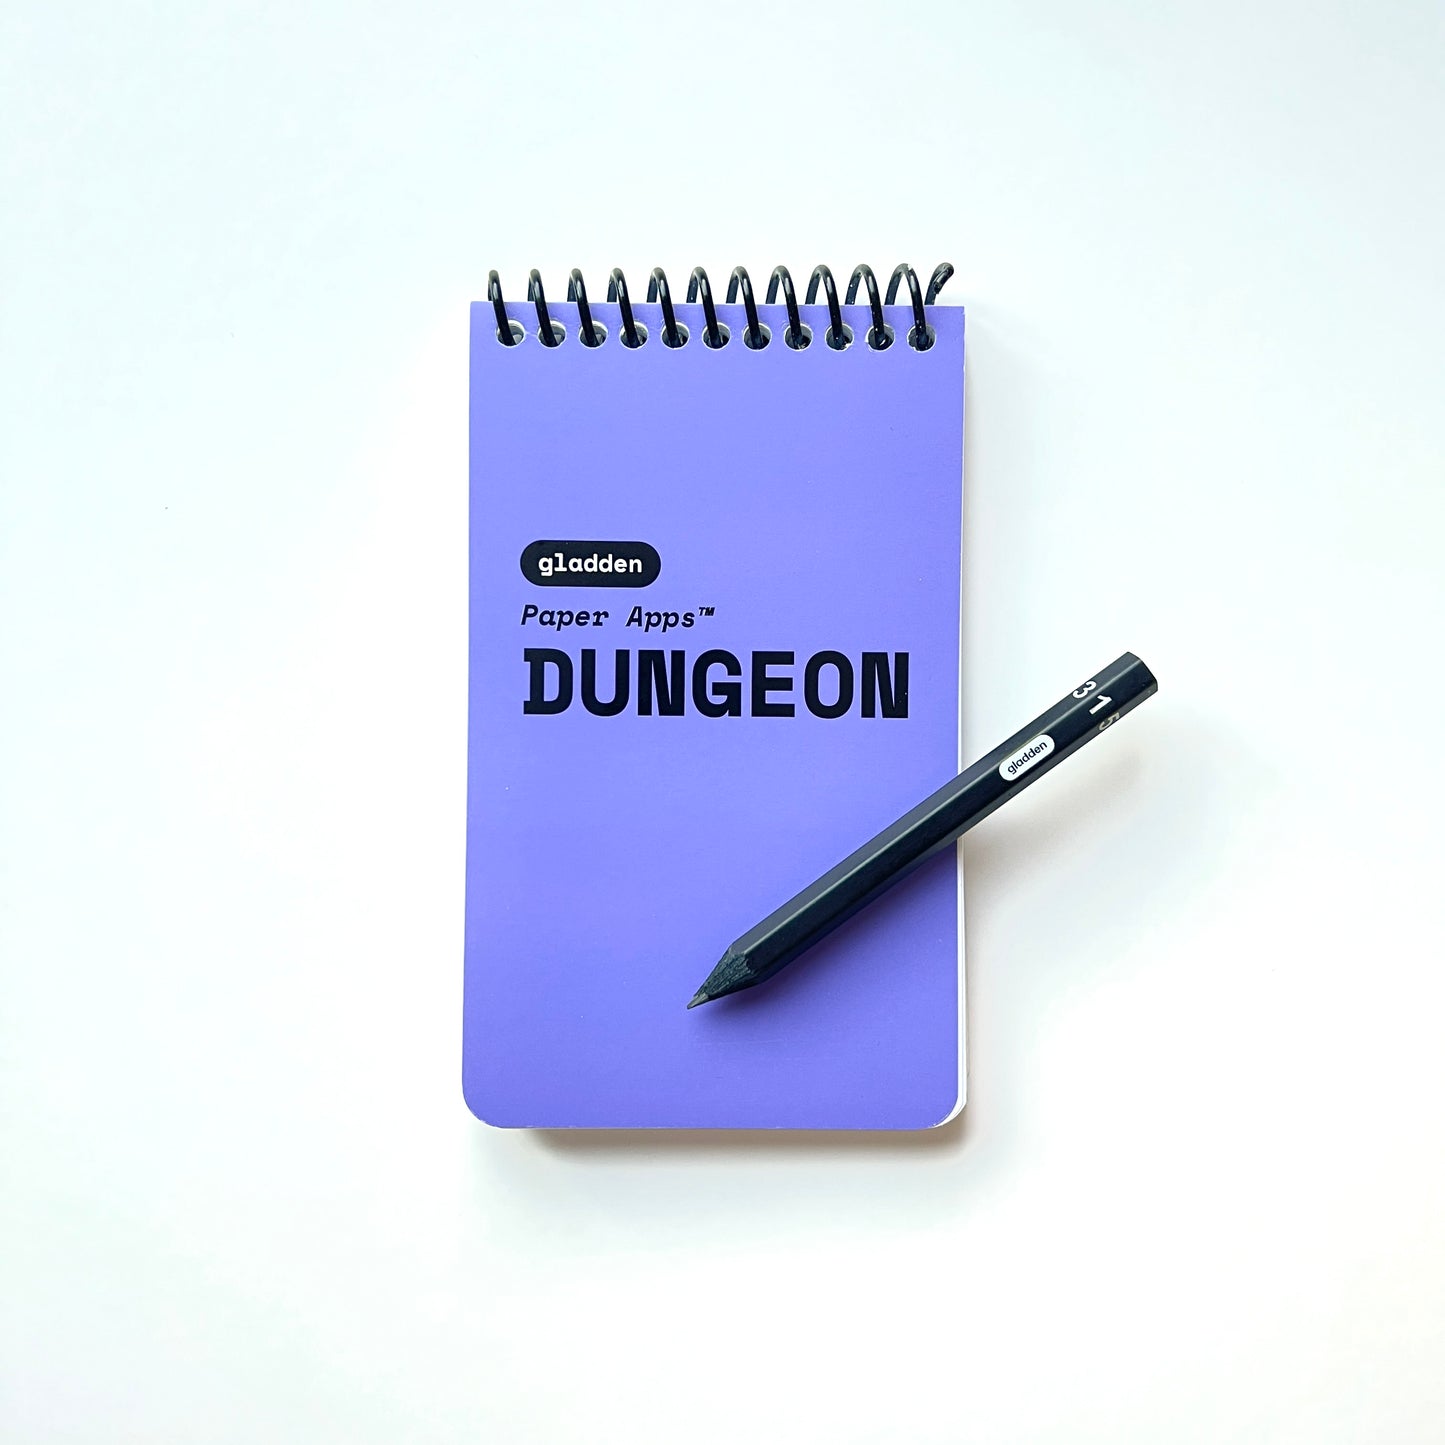 Paper Apps™ DUNGEON (Physical Notebook)